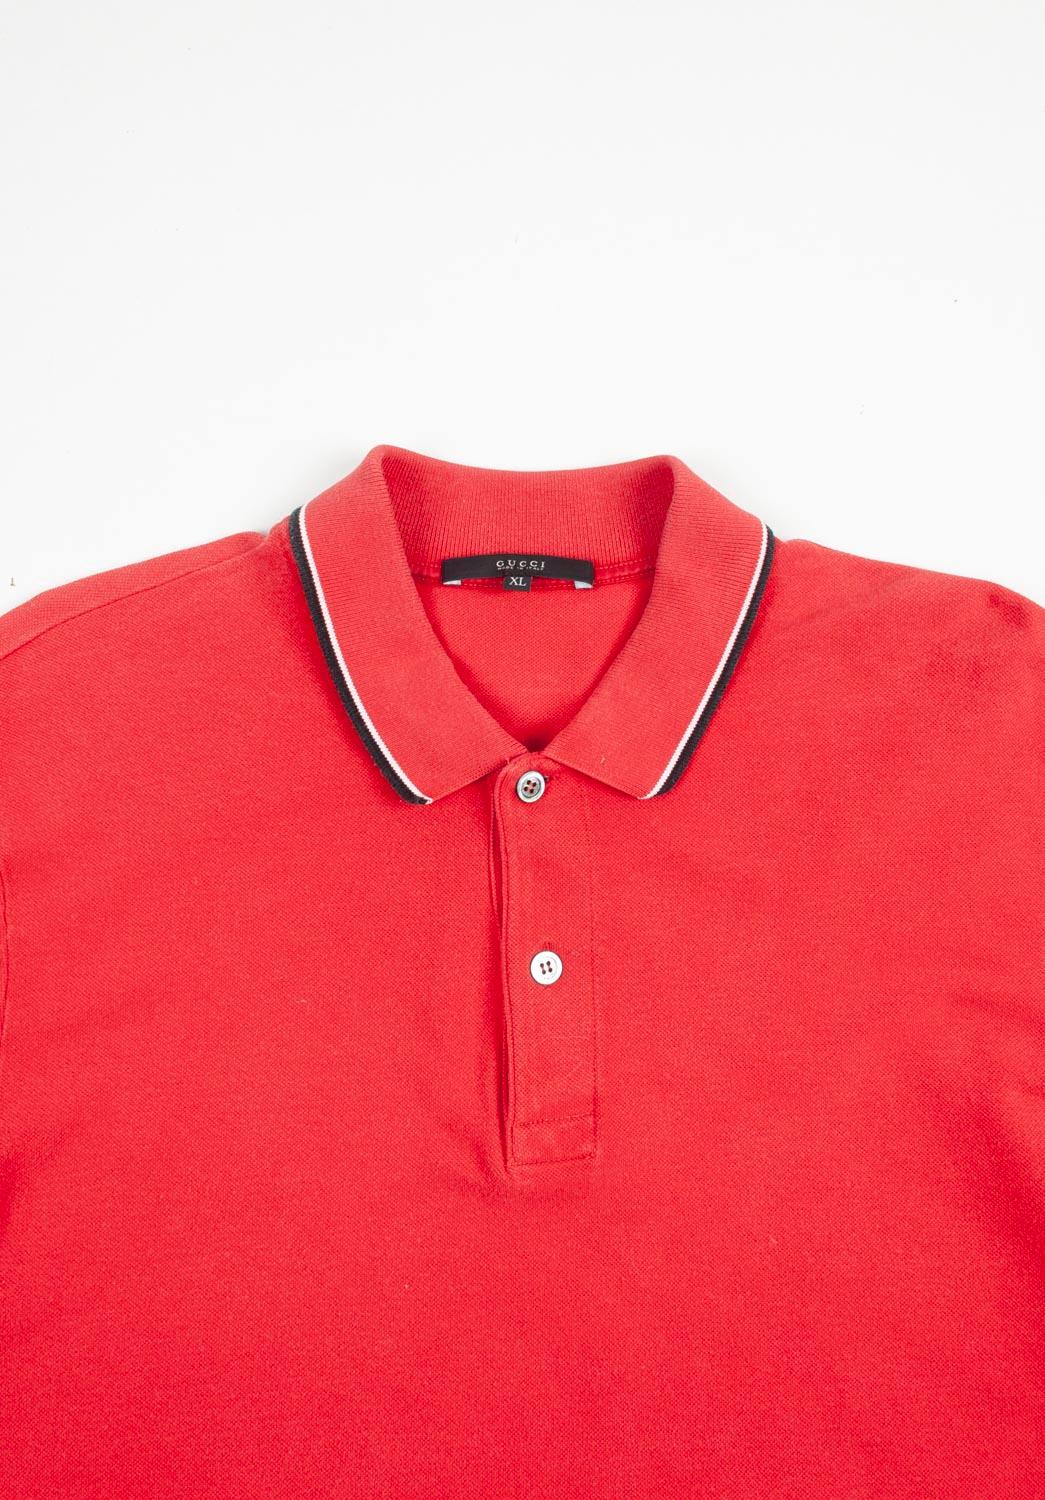 100% genuine Gucci Men Polo, S649 
Color: red
(An actual color may a bit vary due to individual computer screen interpretation)
Material: 100% cotton
Tag size: XL runs slim or better L
This polo shirt is great quality item. Rate 8 of 10, very good